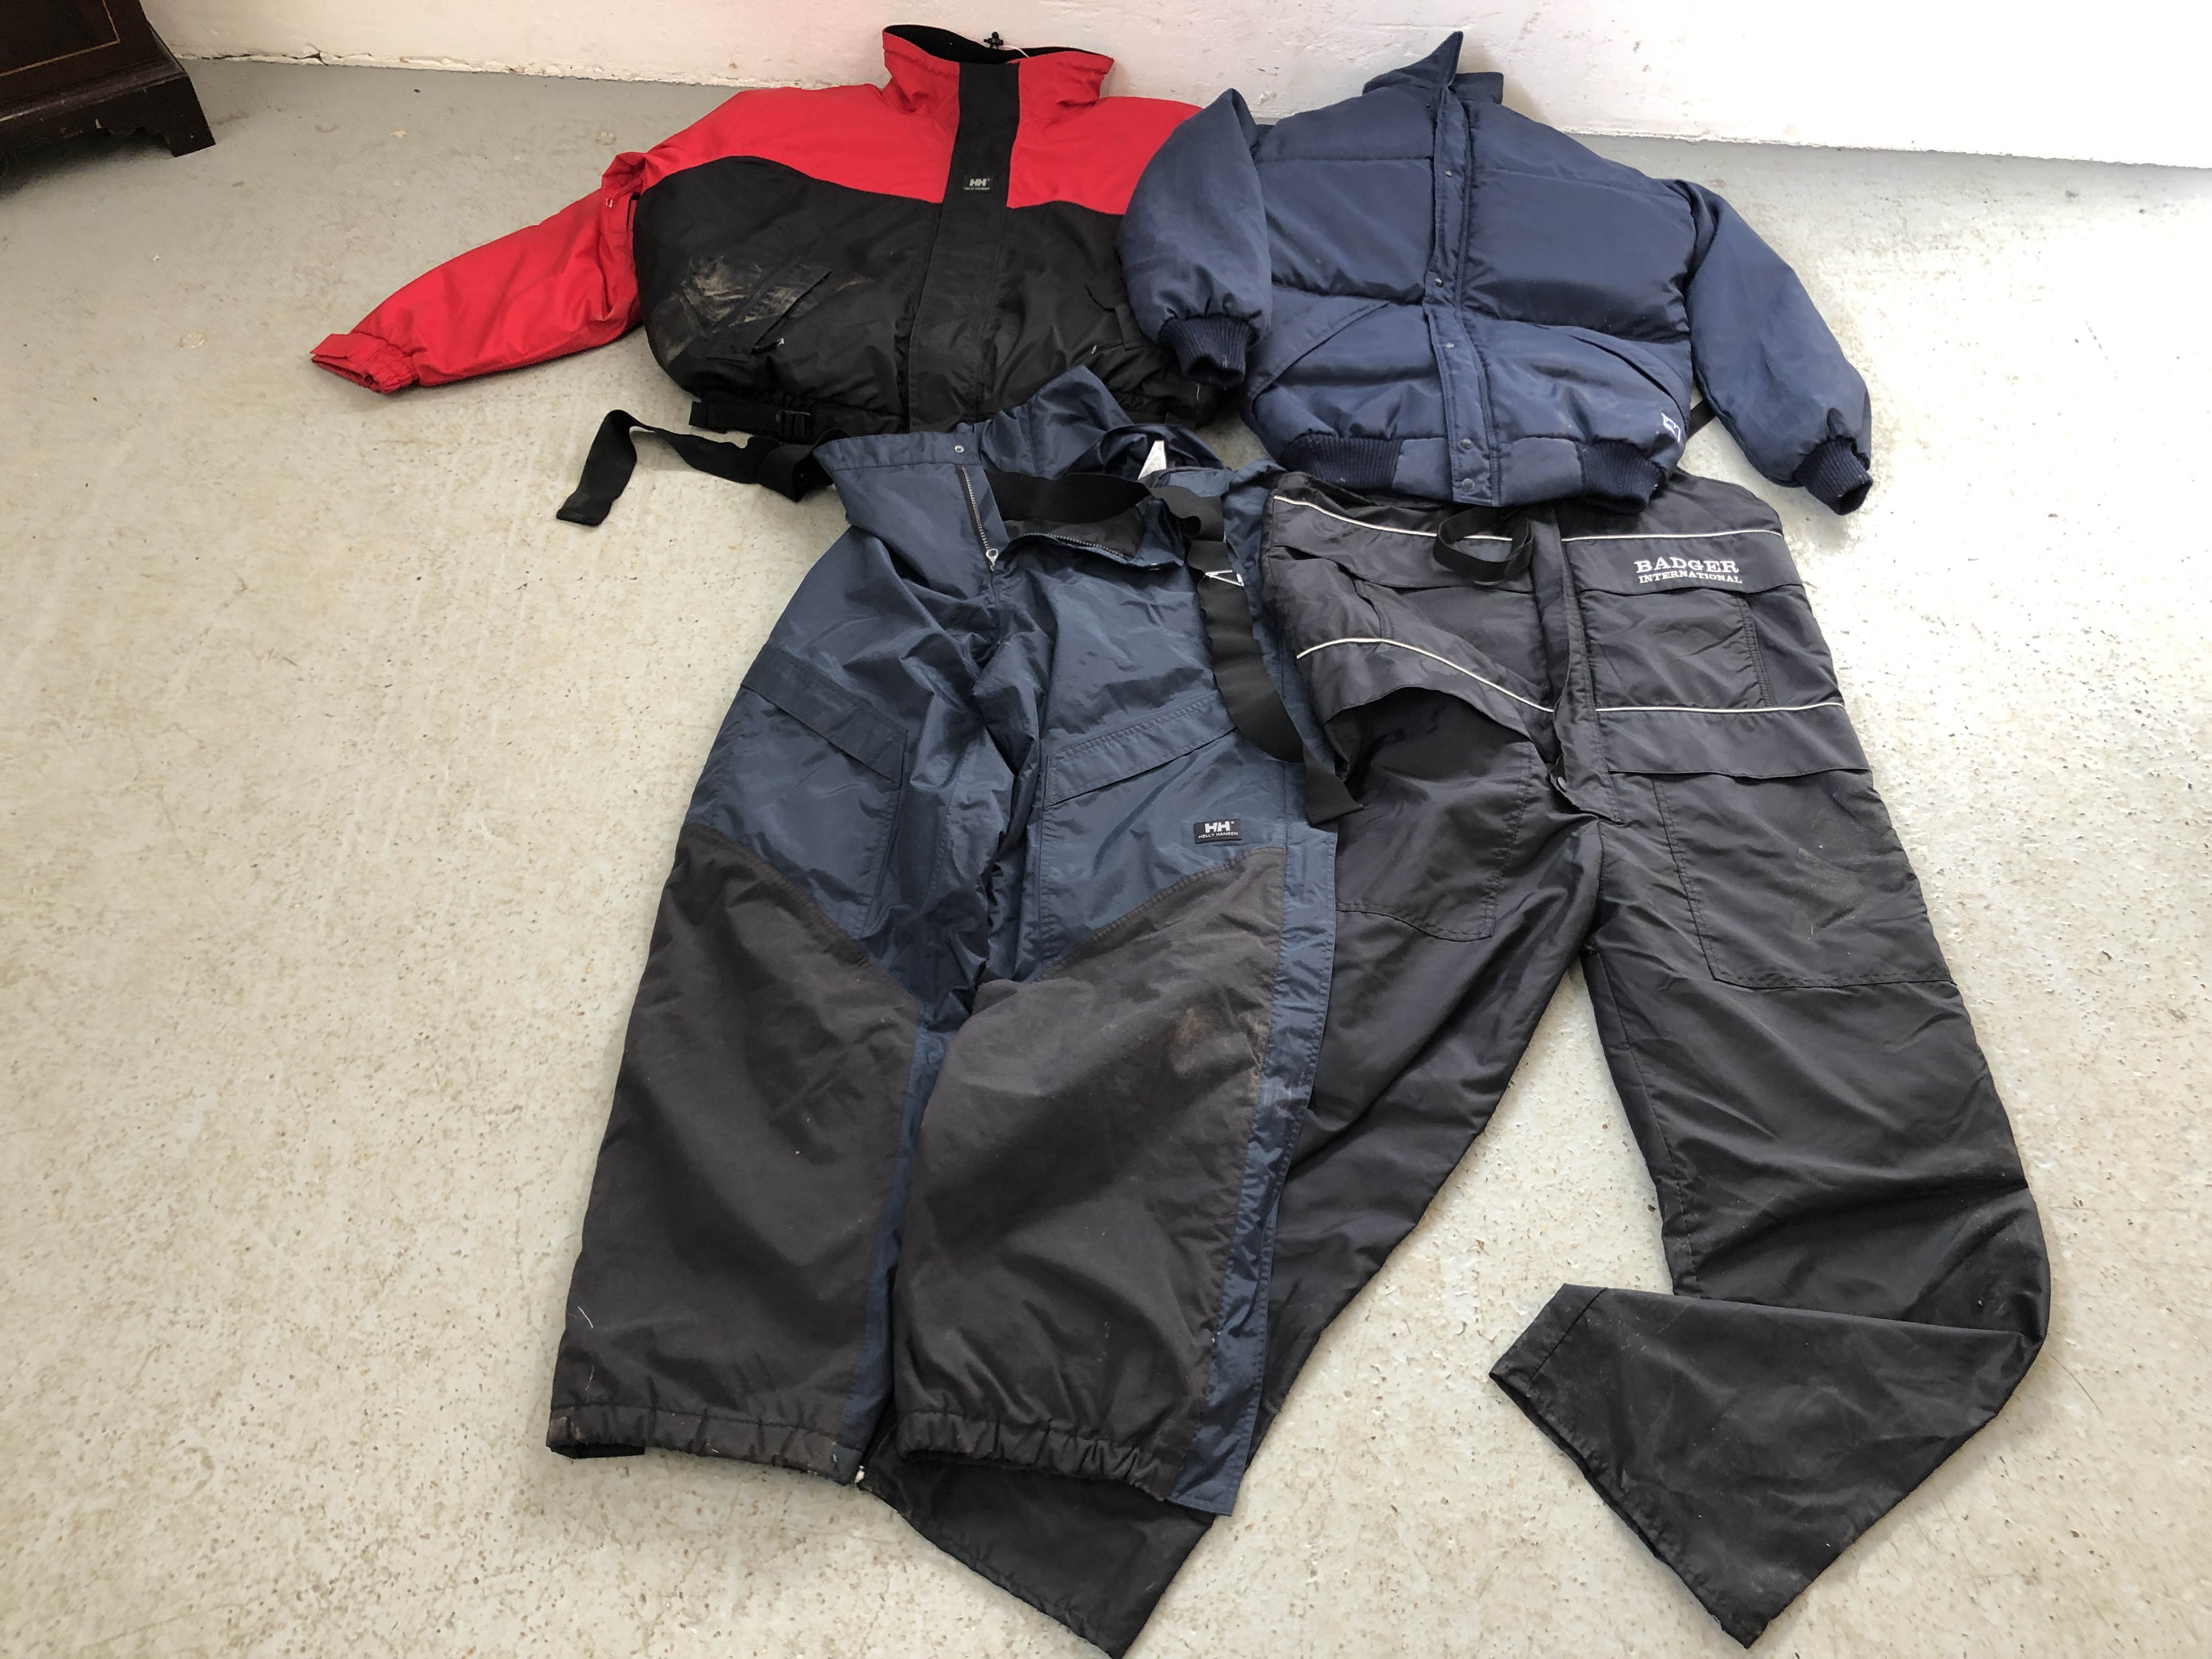 A HELLY HANSEN JACKET AND TROUSERS, JACKET SIZE SMALL,